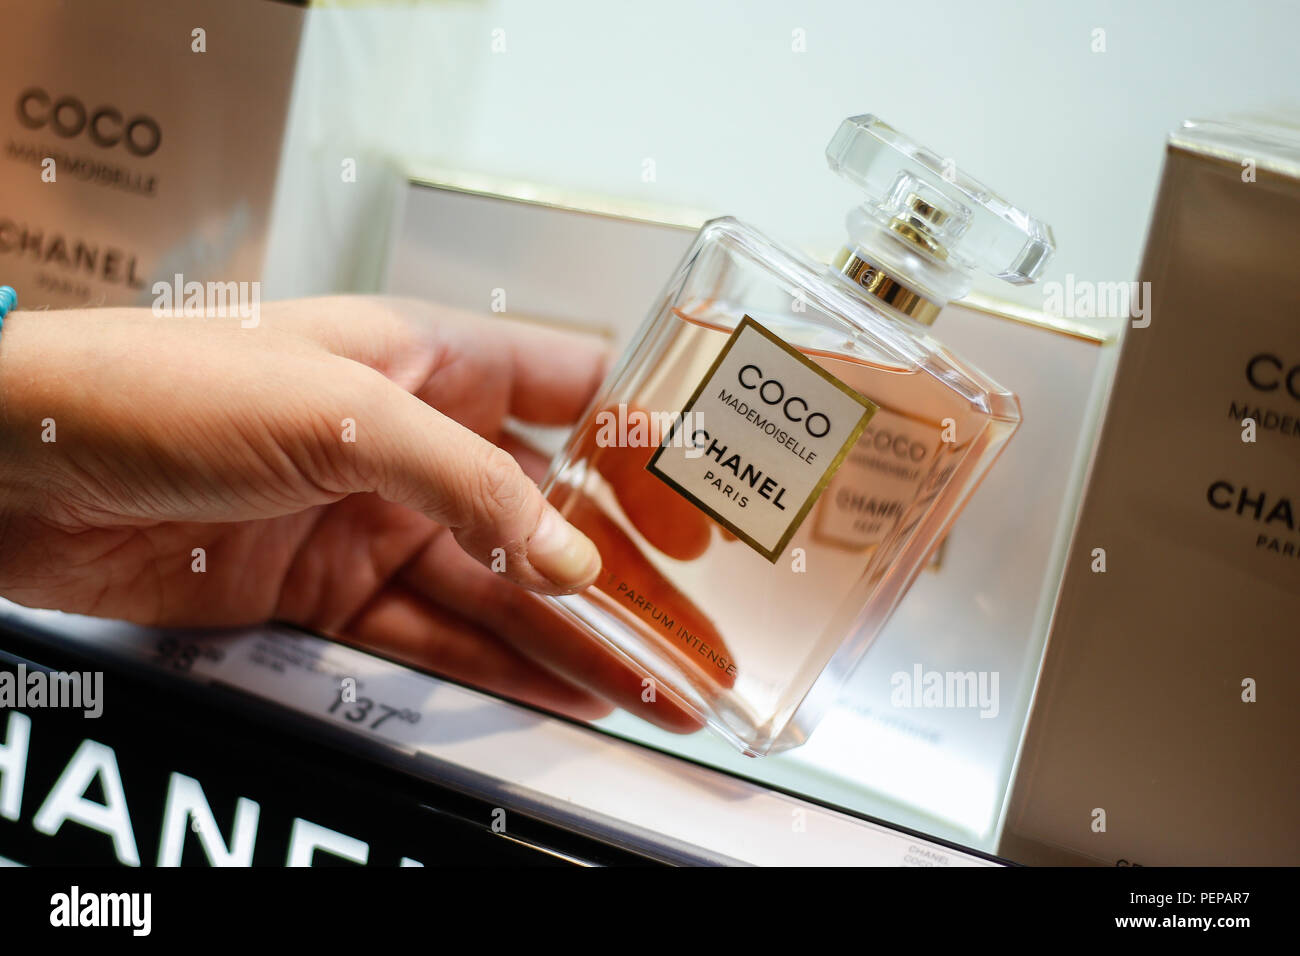 Berlin Germany 16th Aug 18 A Woman Looking At The Perfume Coco Mademoiselle By Chanel Paris In A Douglas Perfumery Credit Gerald Matzka Dpa Zentralbild Zb Dpa Alamy Live News Stock Photo Alamy